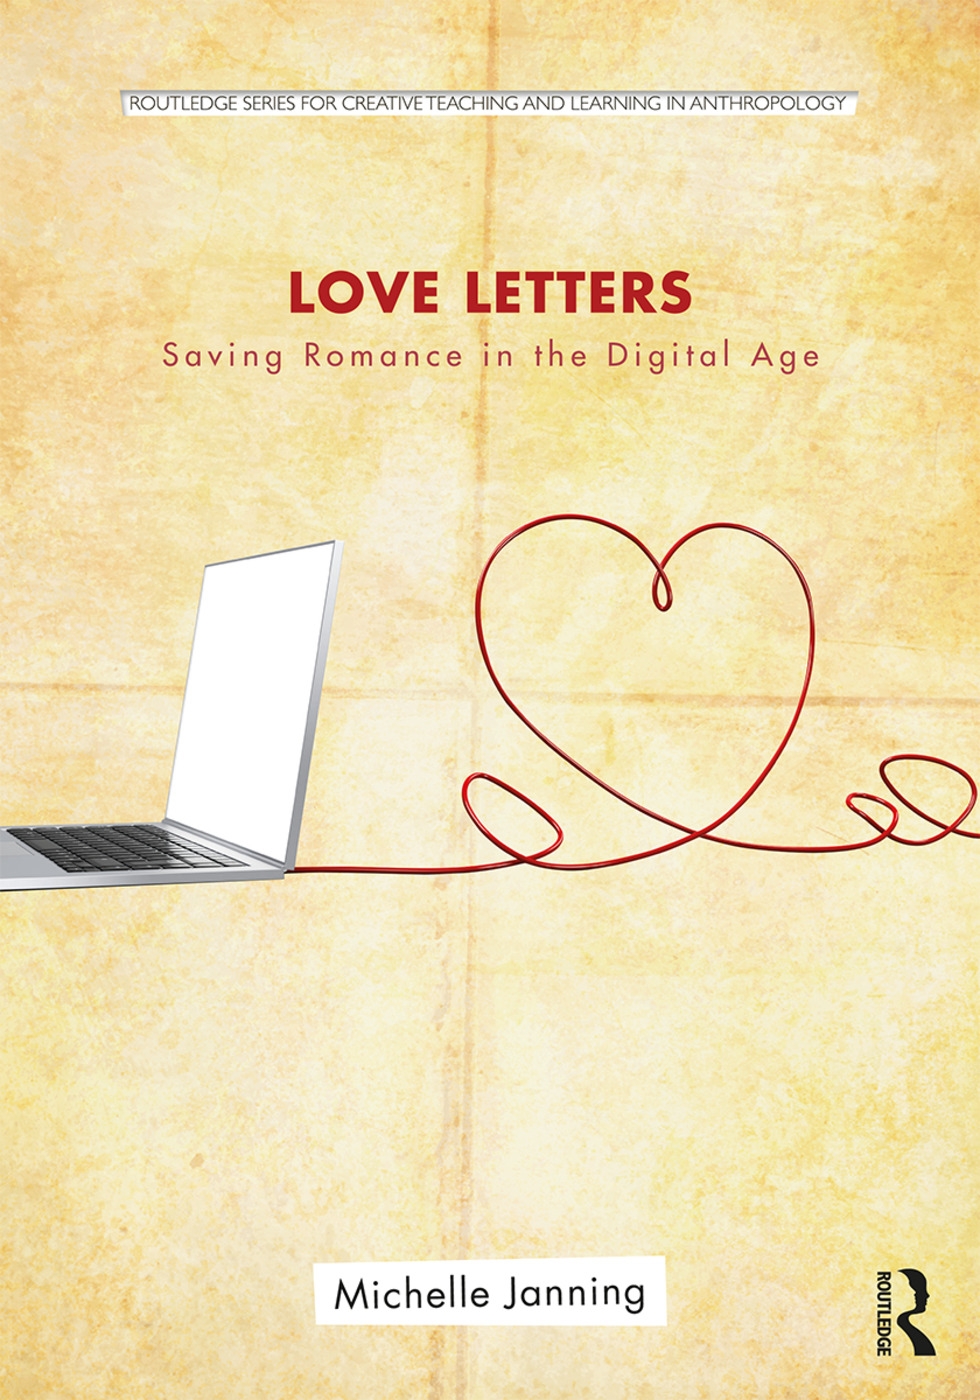 Love Letters: Saving Romance in the Digital Age